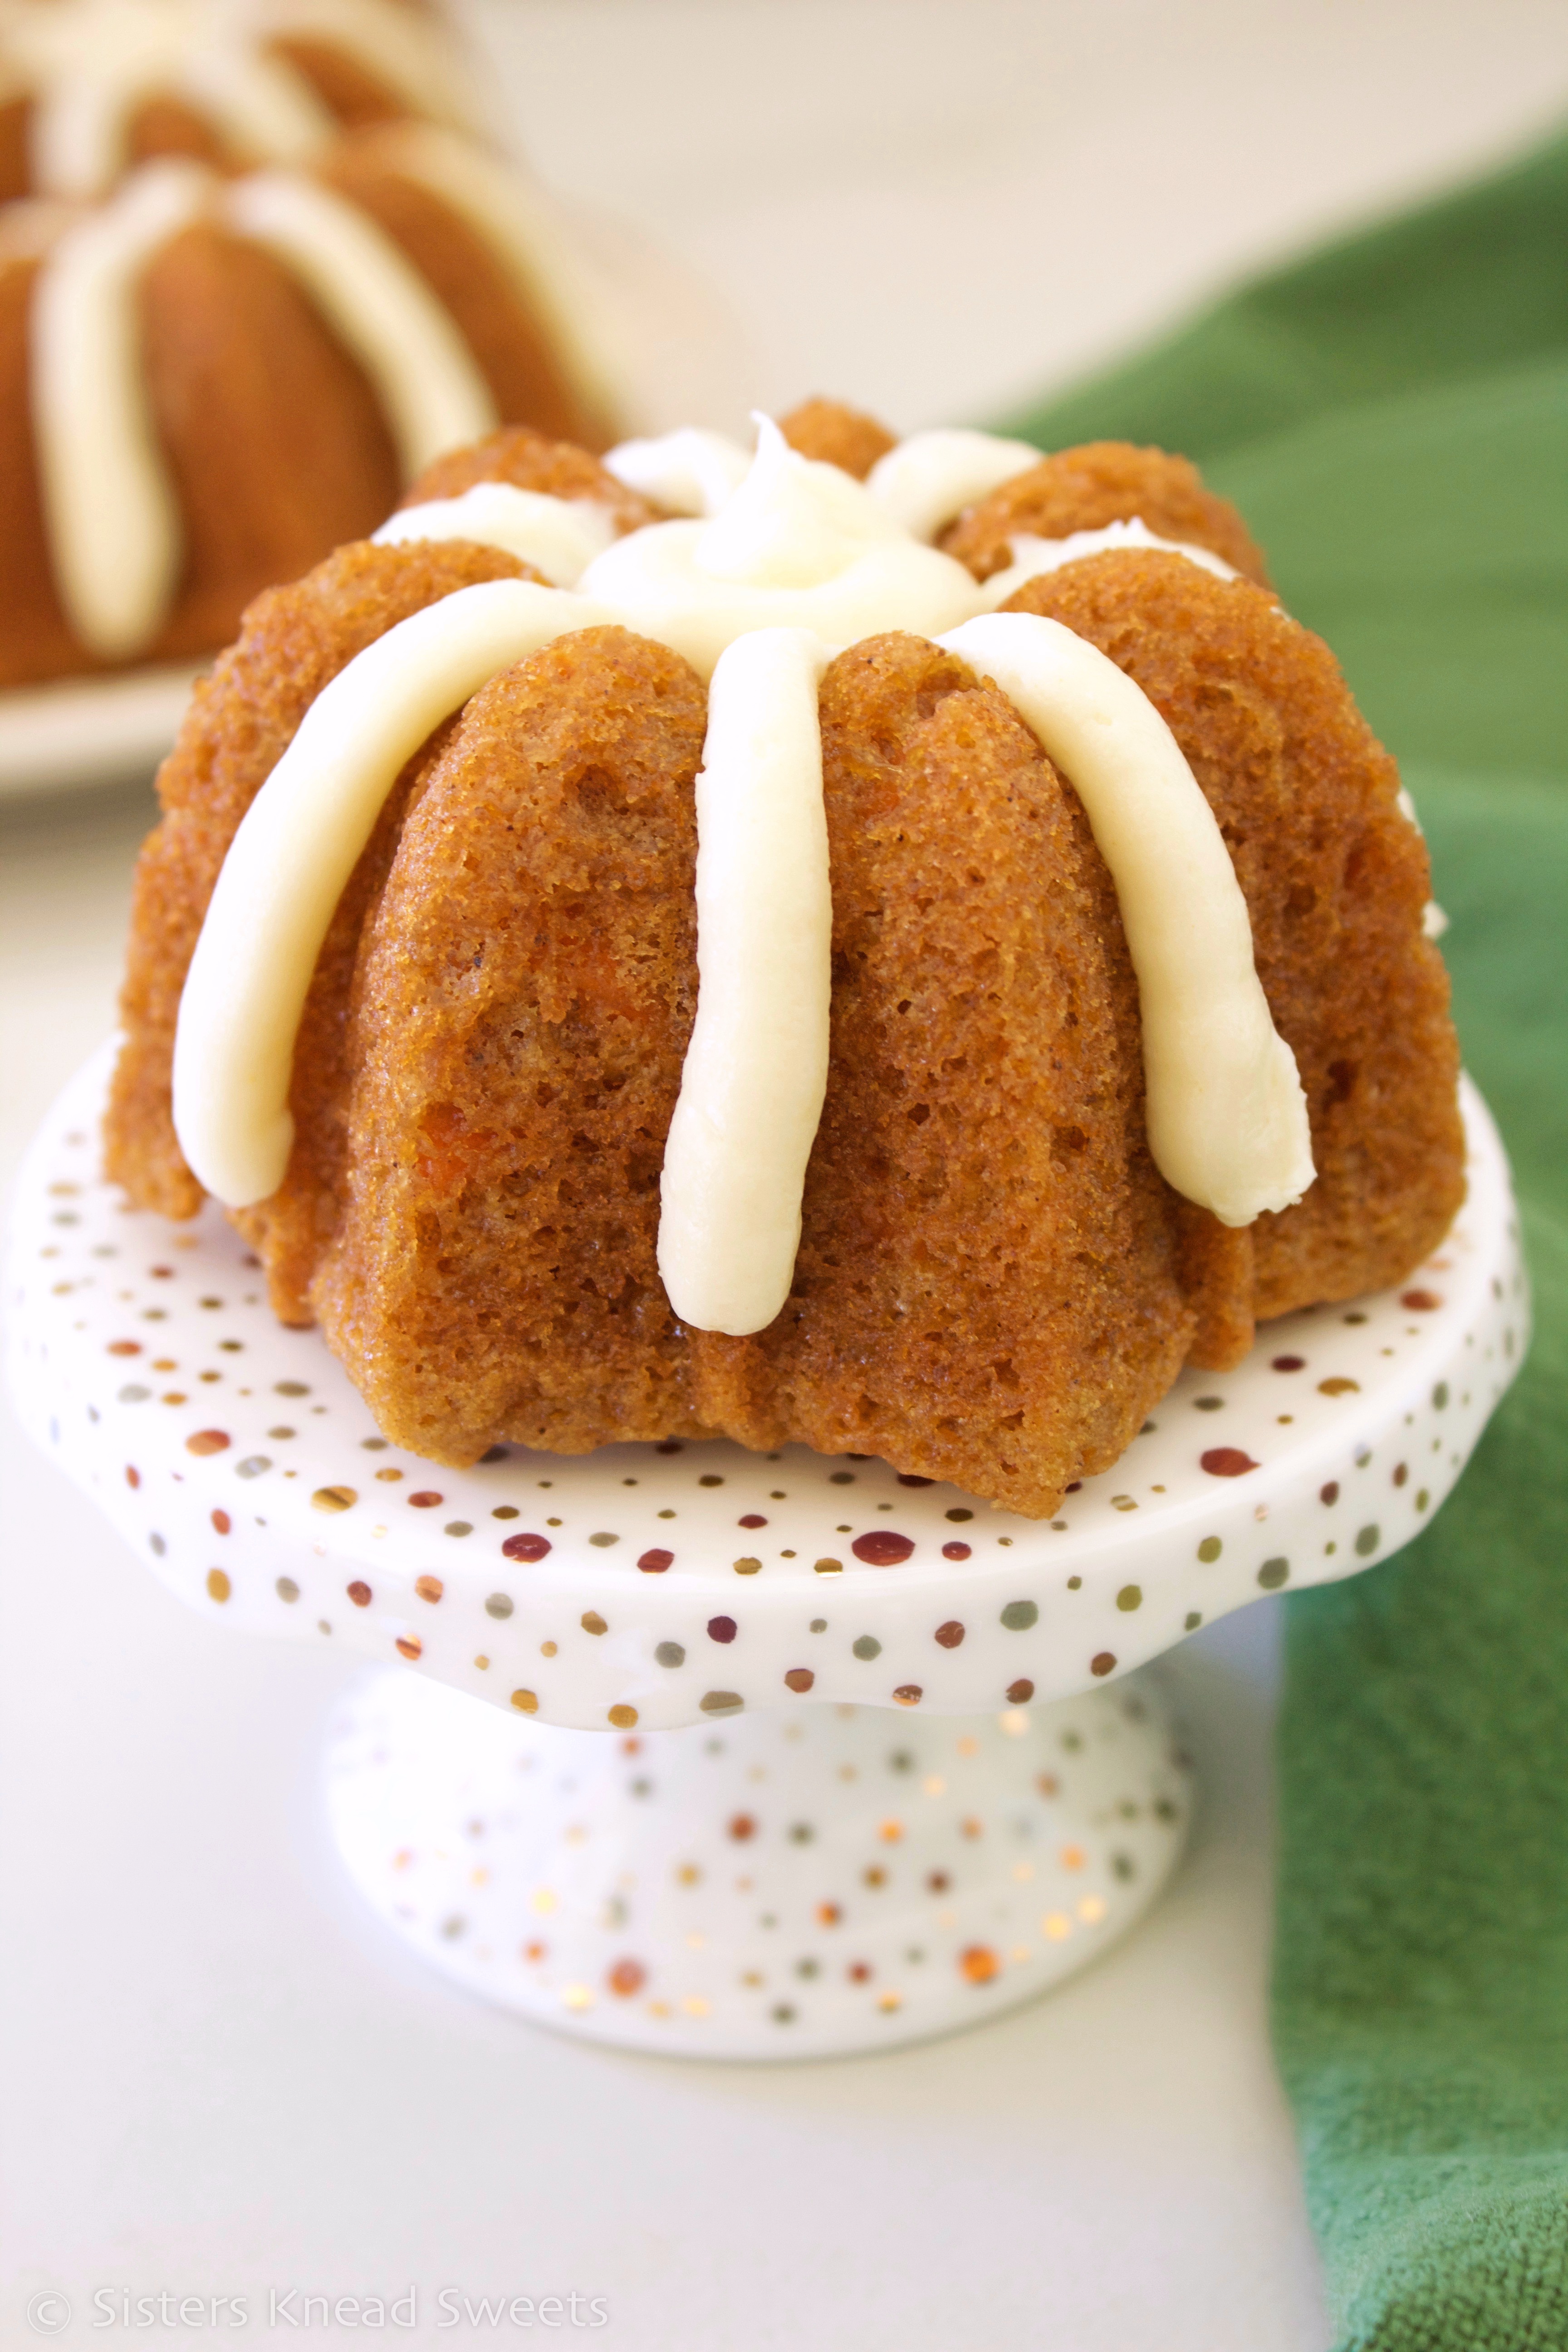 mini carrot bundt cakes pic 1 - Sisters Knead Sweets